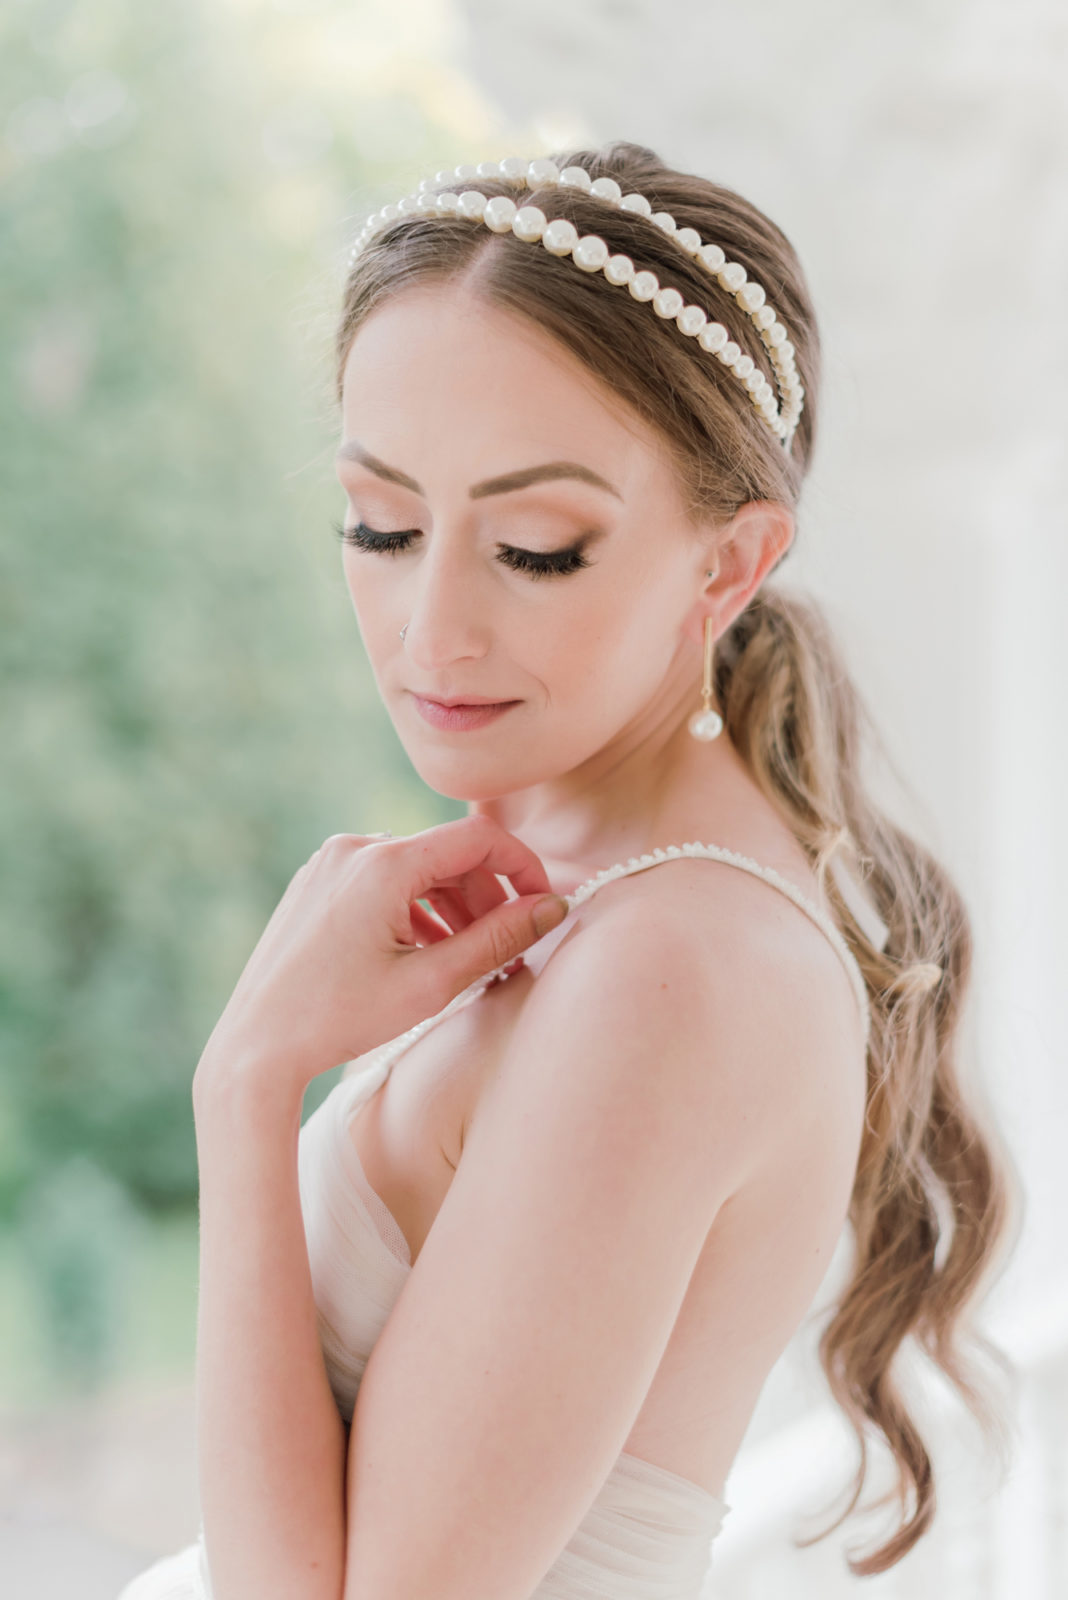 15 Bridal Crowns Made in Canada You'll Fall Head-Over-Heels in Love With - featured on Brontë Bride